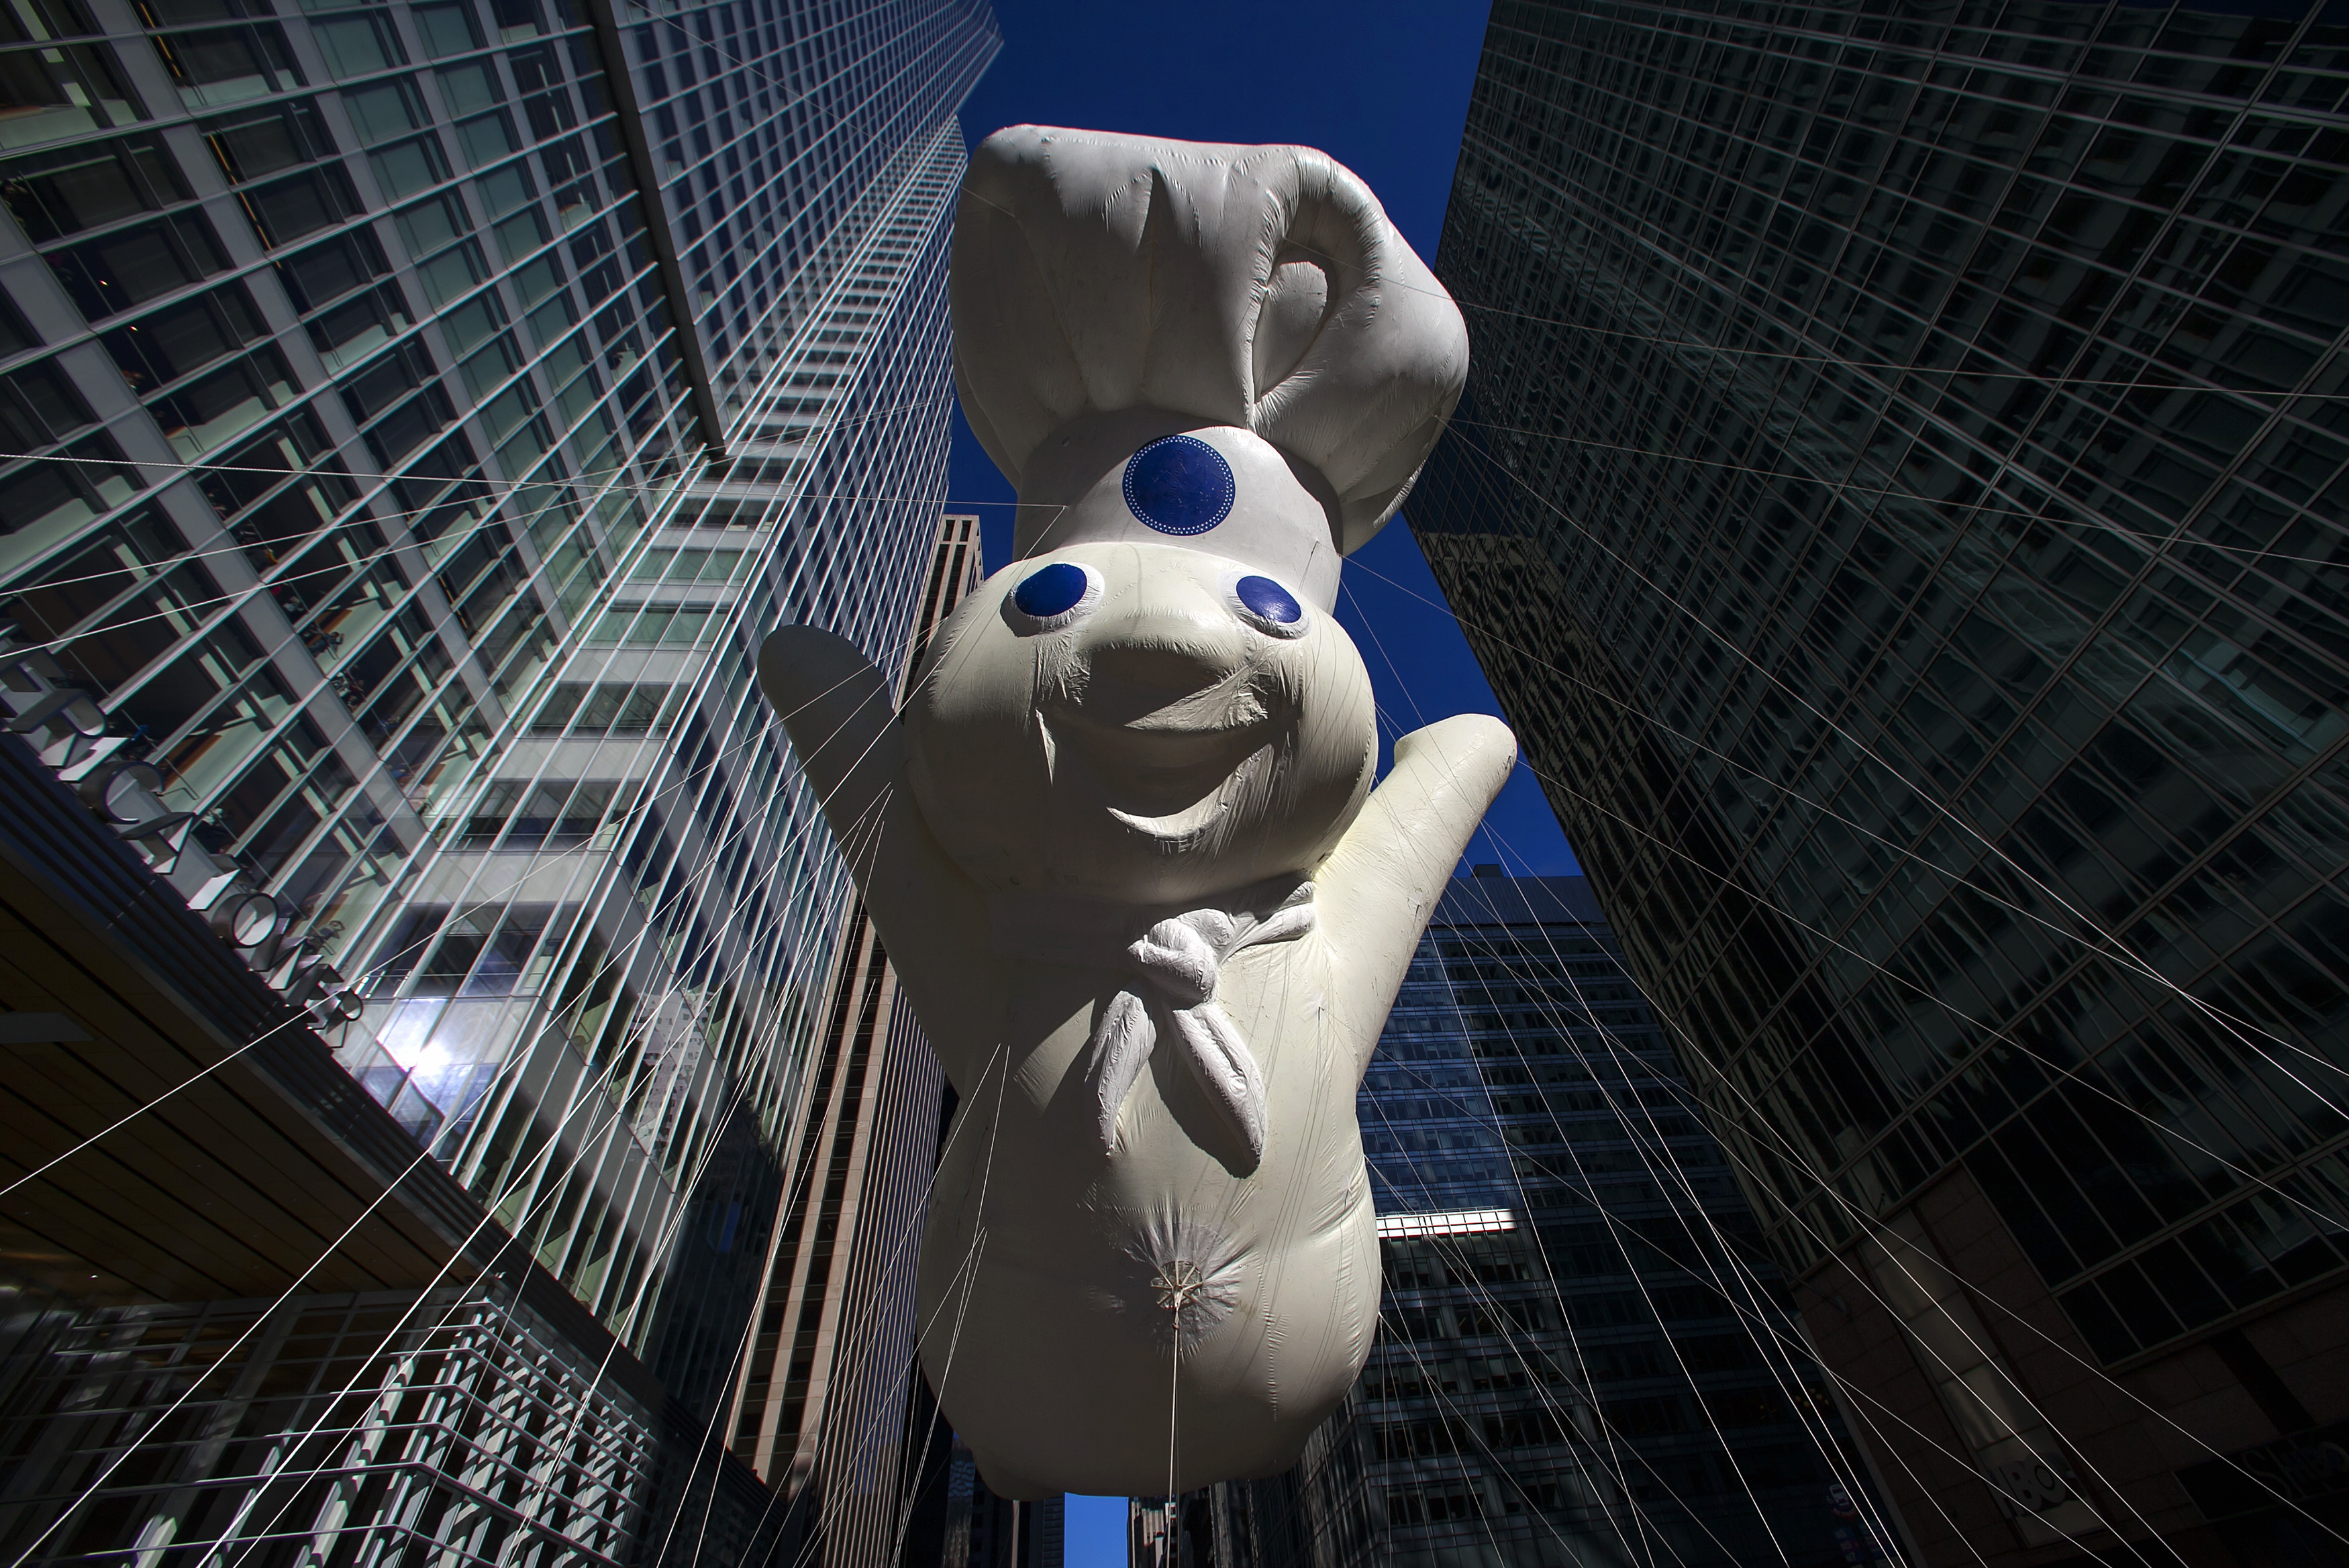 A Pillsbury Doughboy balloon float at the 87th Macy's Thanksgiving Day Parade in New York November 28, 2013